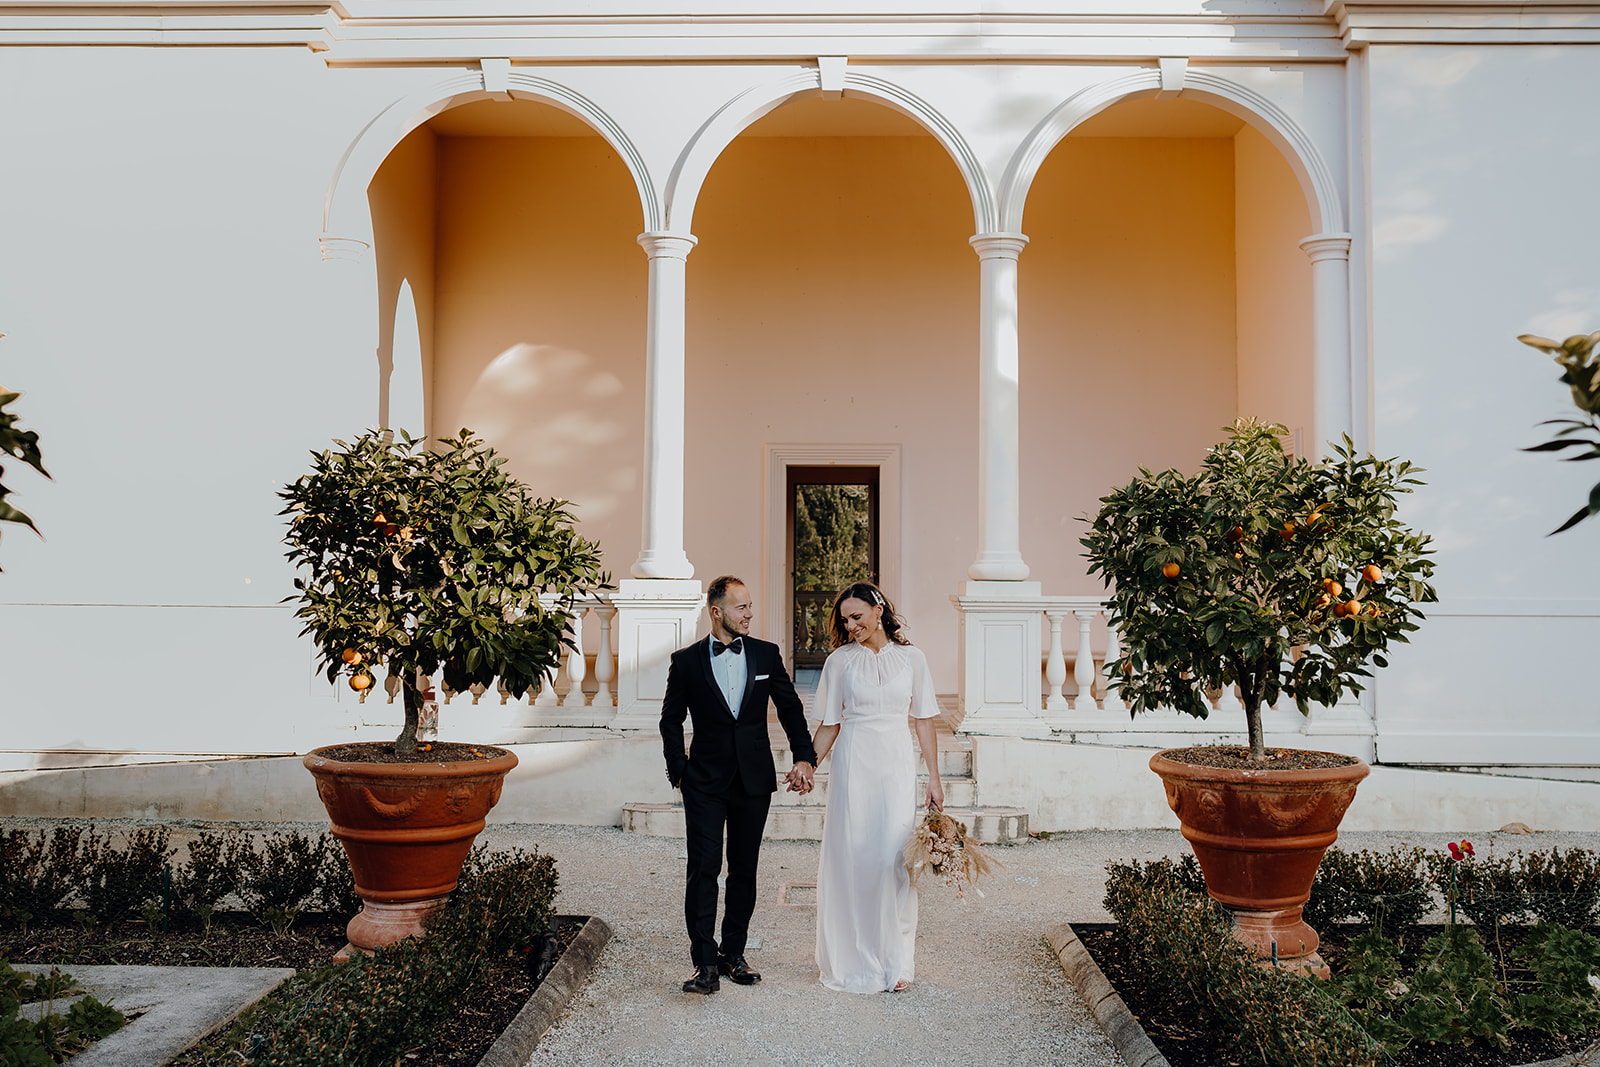 A couple standing in the Italian gardens in the Hamilton Gardens being photographed in their suit and wedding dress by Waikato wedding photographer Haley Adele Photography